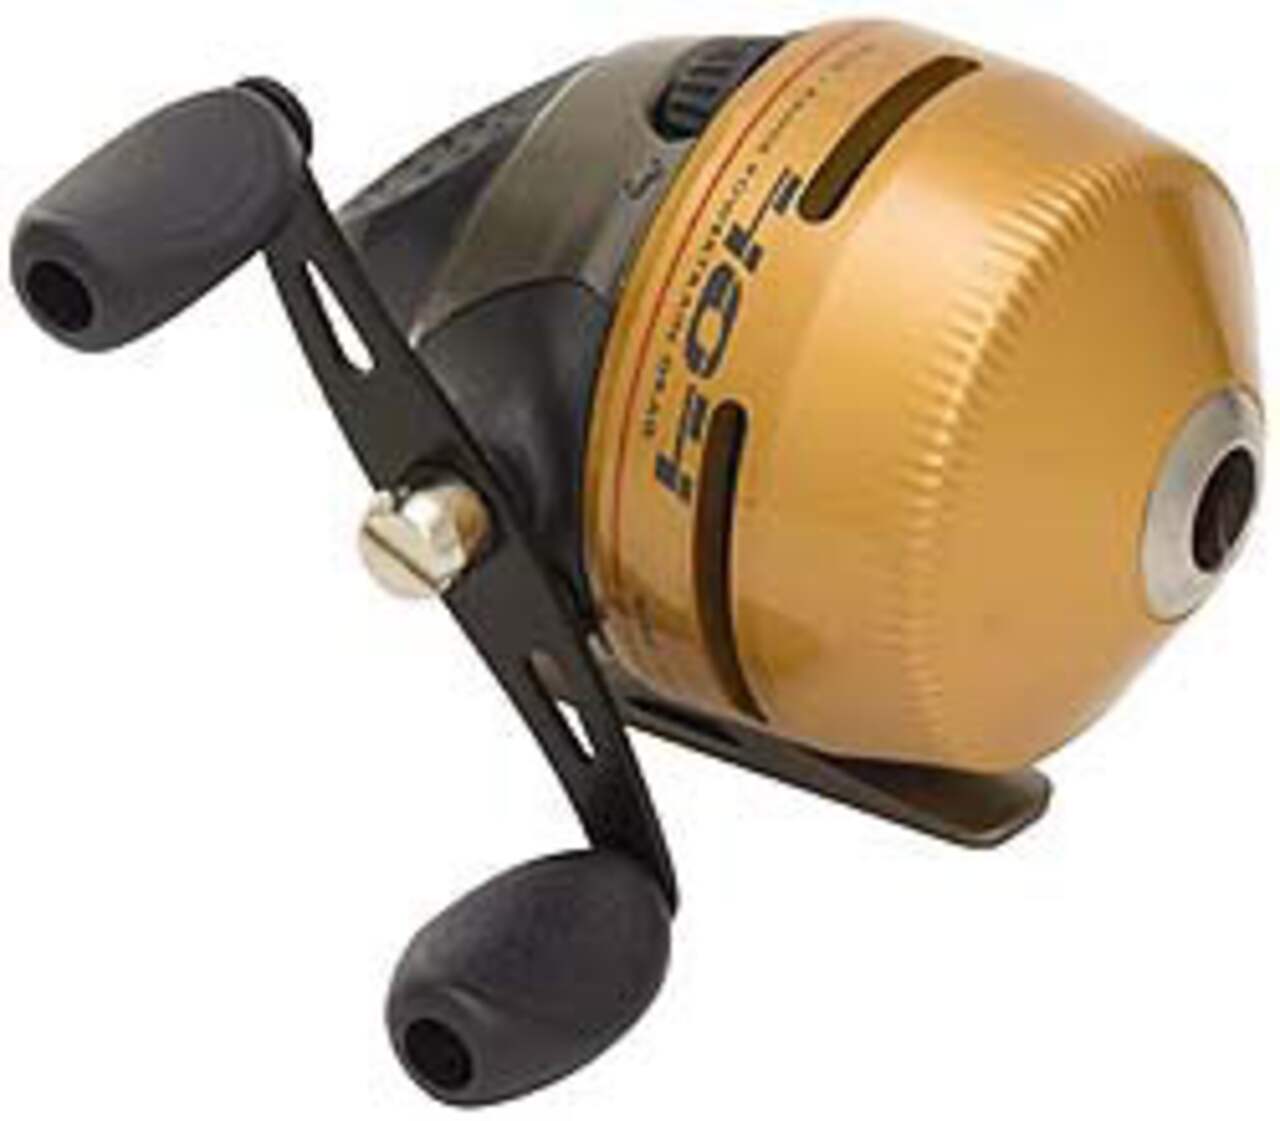 https://media-www.canadiantire.ca/product/playing/fishing/fishing-equipment/0784429/zebco-404-spincast-reel-d8ce2b73-4e86-45e5-ae5b-cb9c72de8788.png?imdensity=1&imwidth=640&impolicy=mZoom